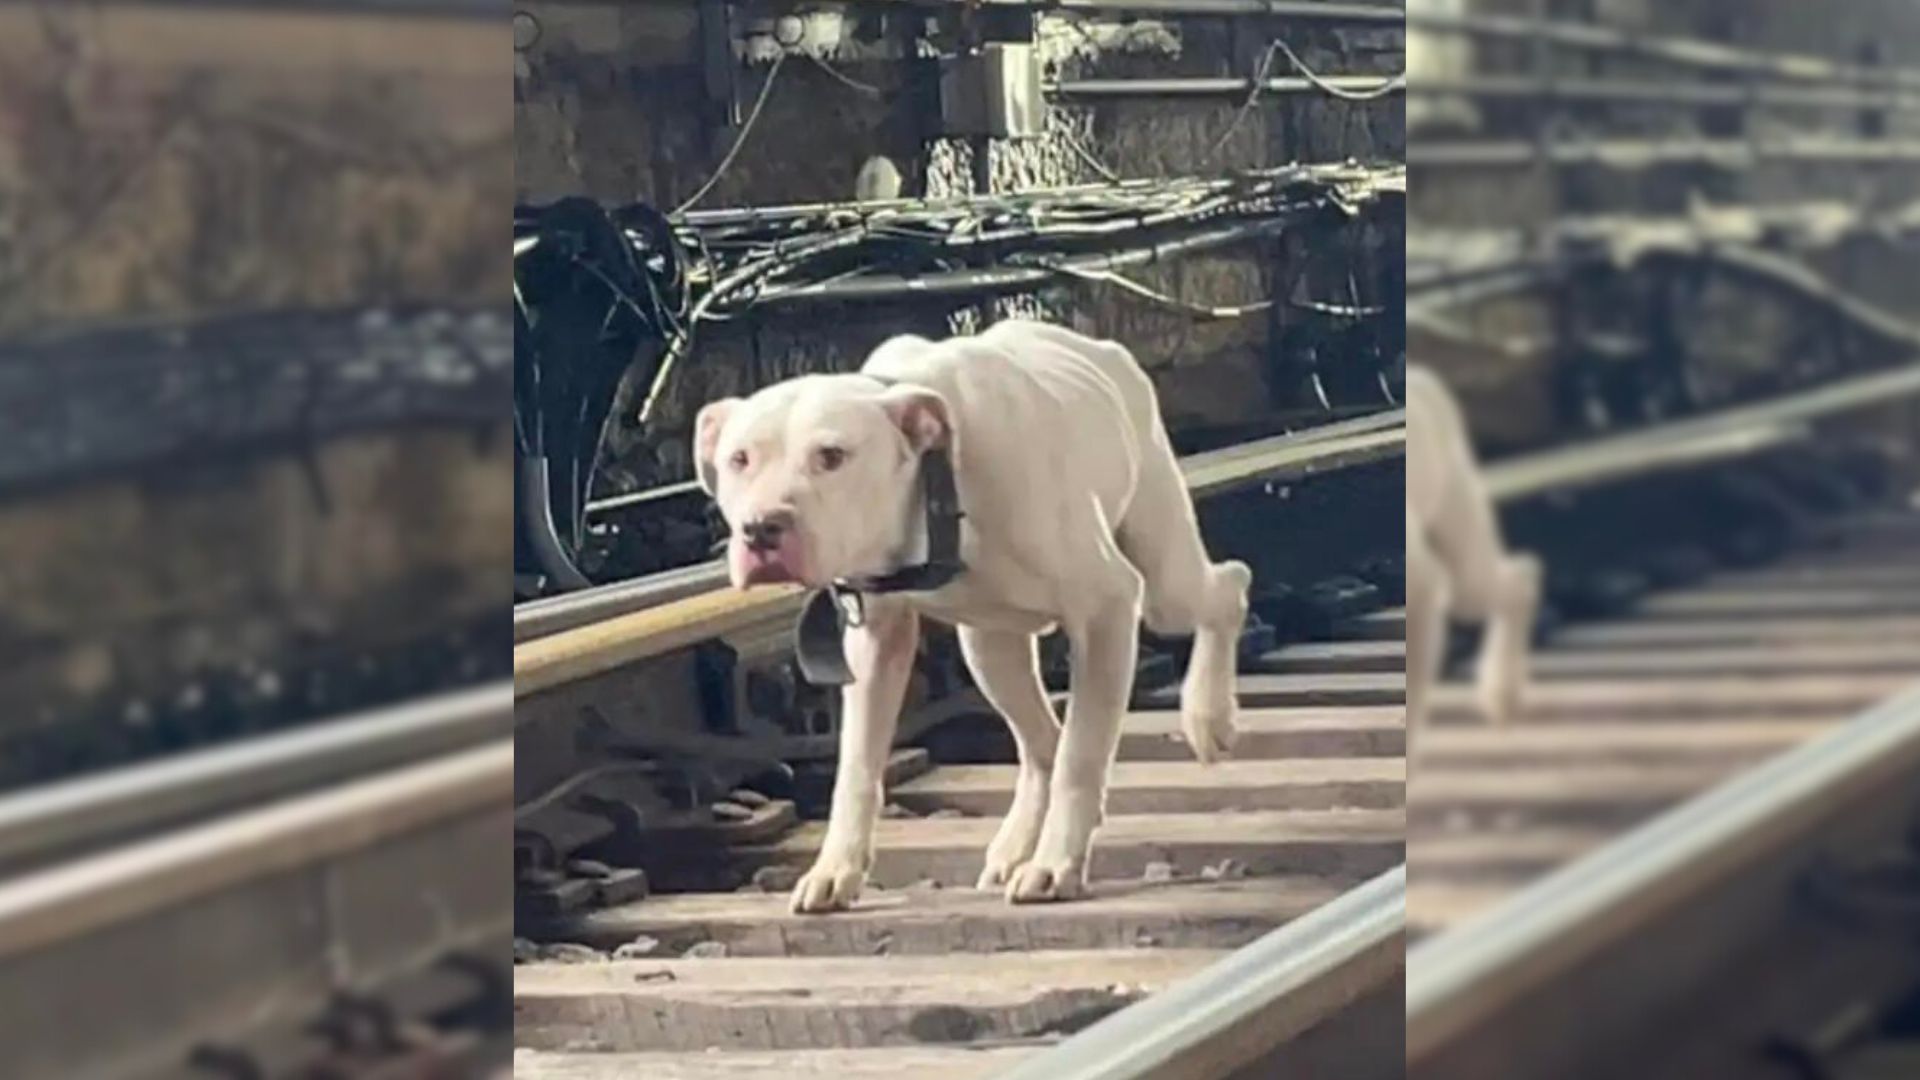 Missouri Rescuers Notice A Frightened Dog Running Along The Railroad Tracks And Rush To Help